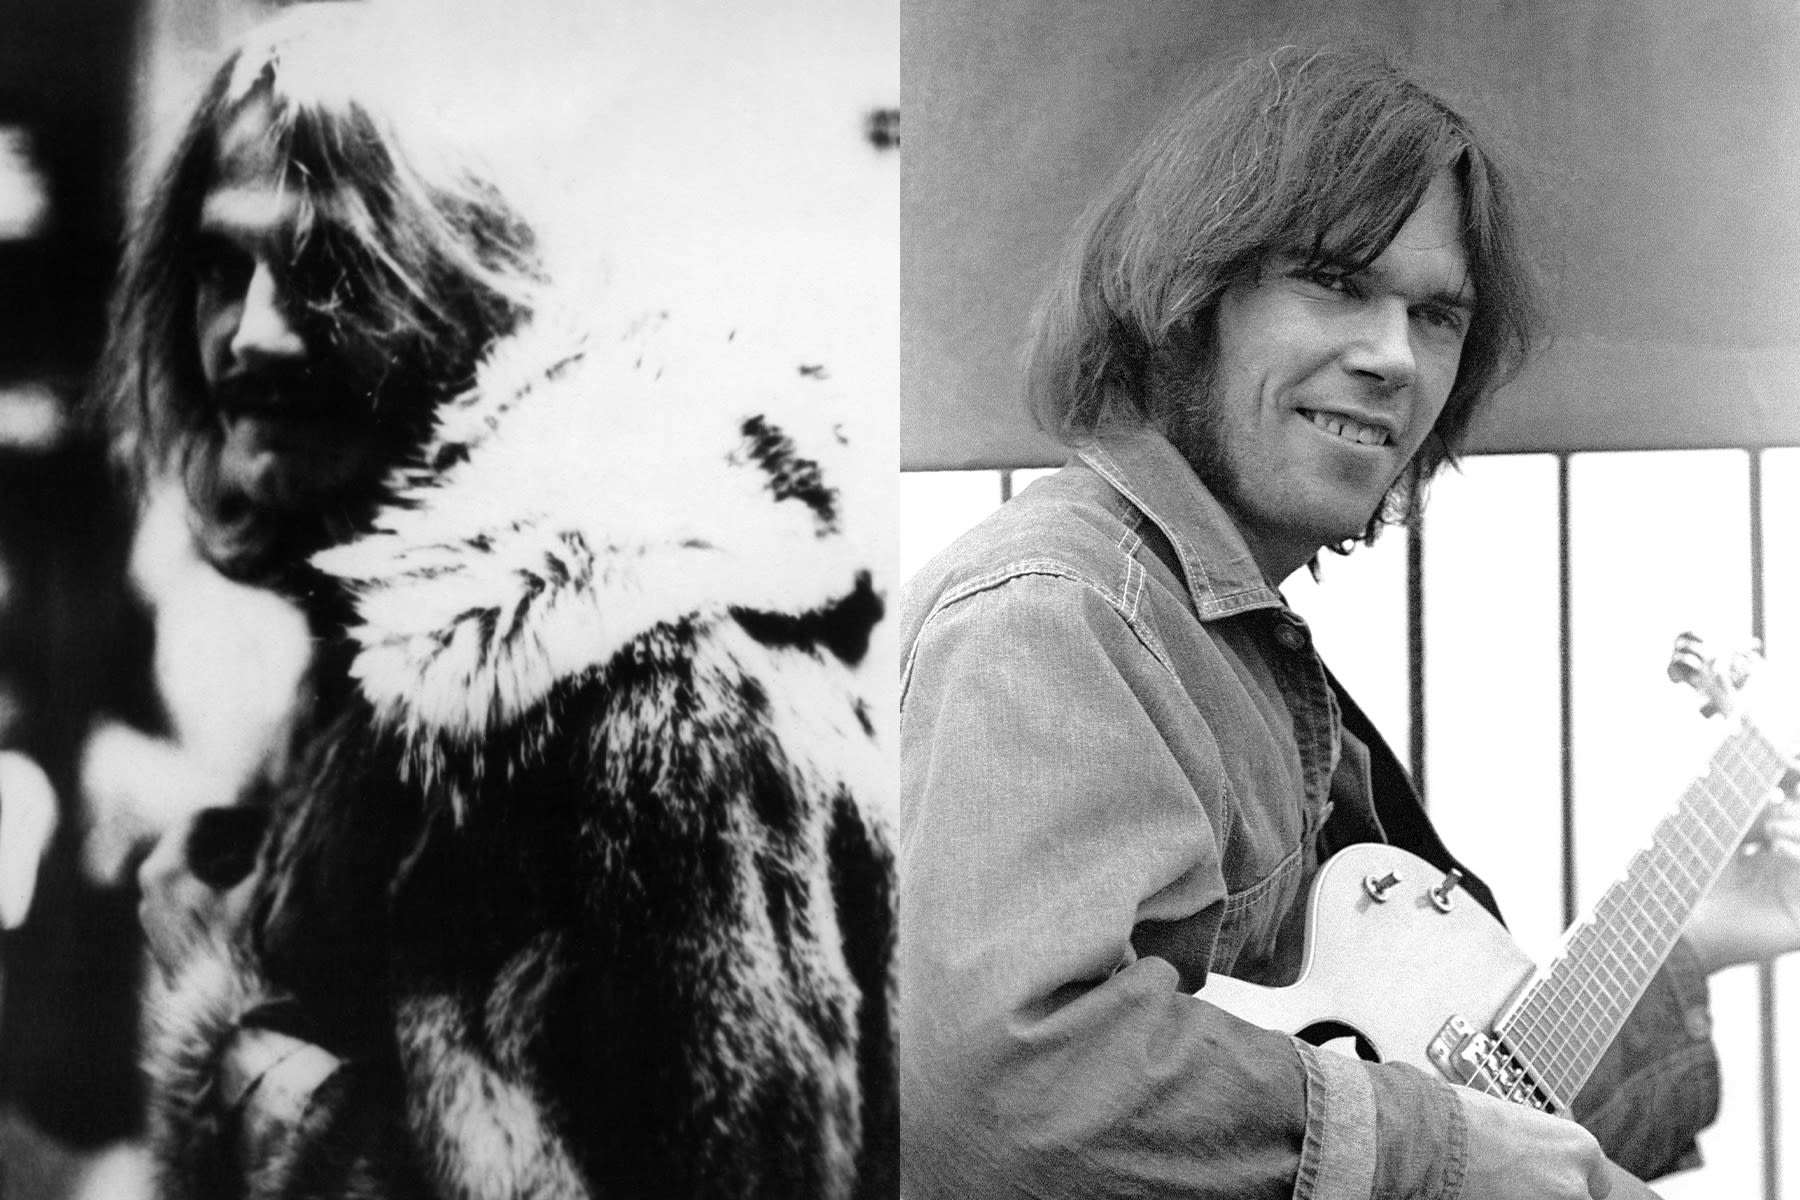 Neil Young’s Latest Archival Release Puts the Late, Great Danny Whitten Front and Center